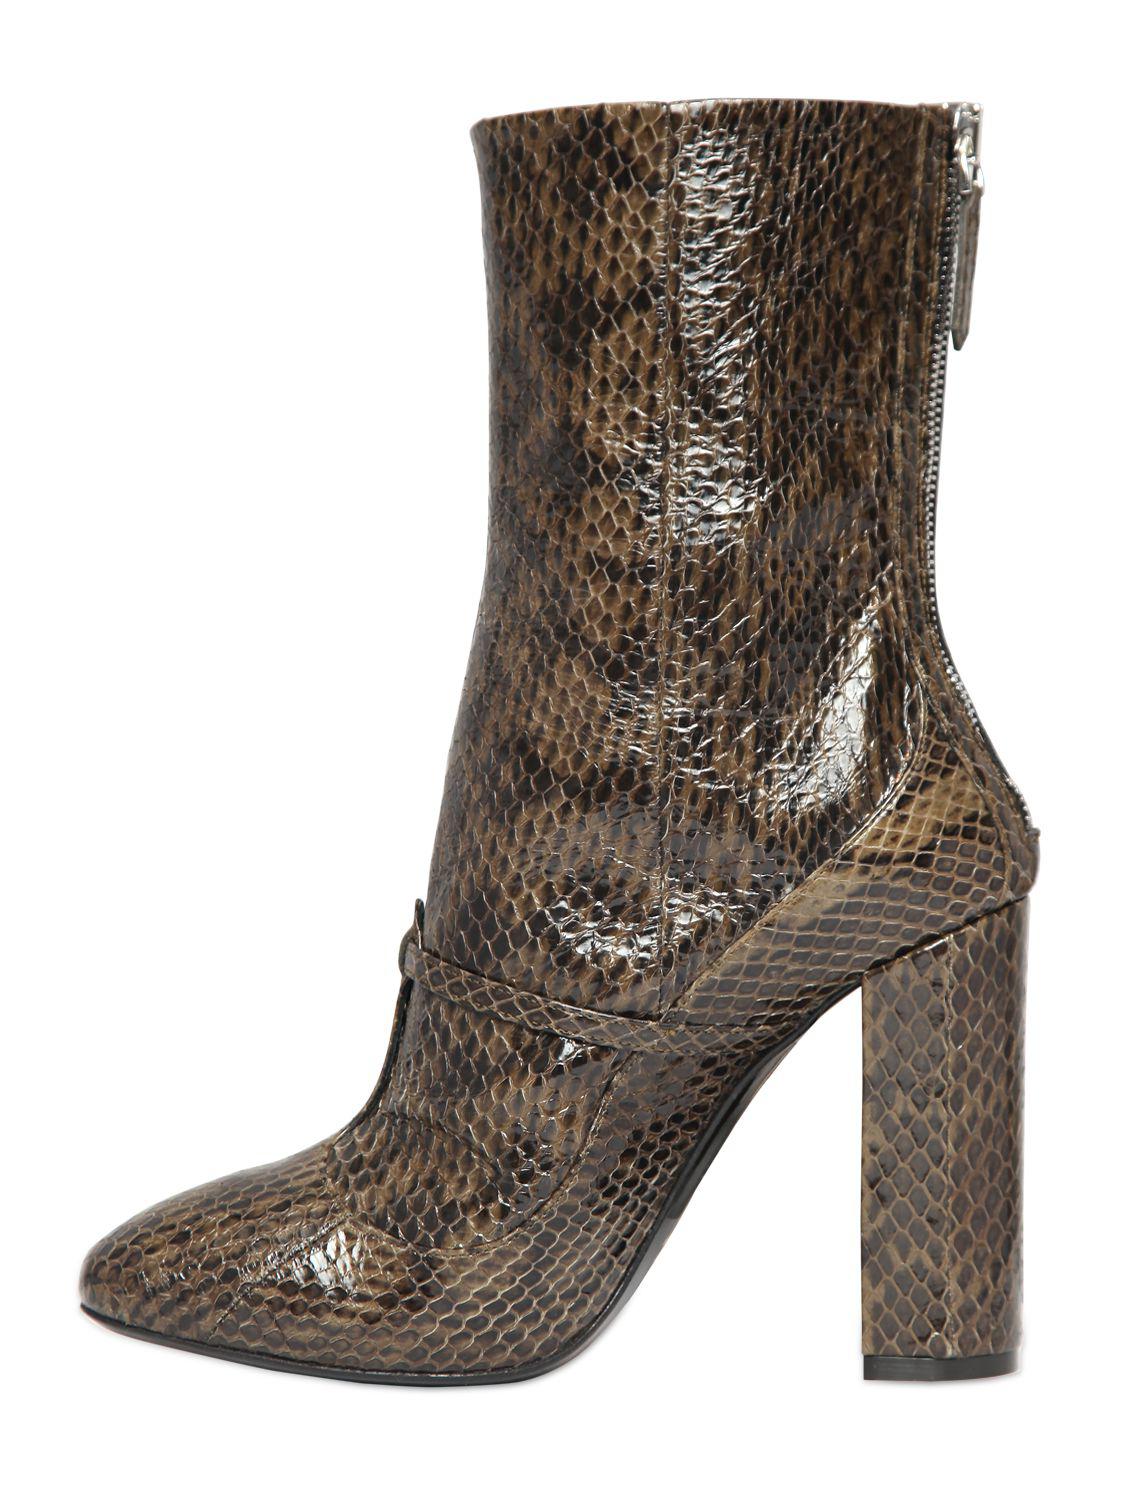 N°21 Leather 100mm Elaphe Snakeskin Ankle Boots in Khaki (Natural) - Lyst